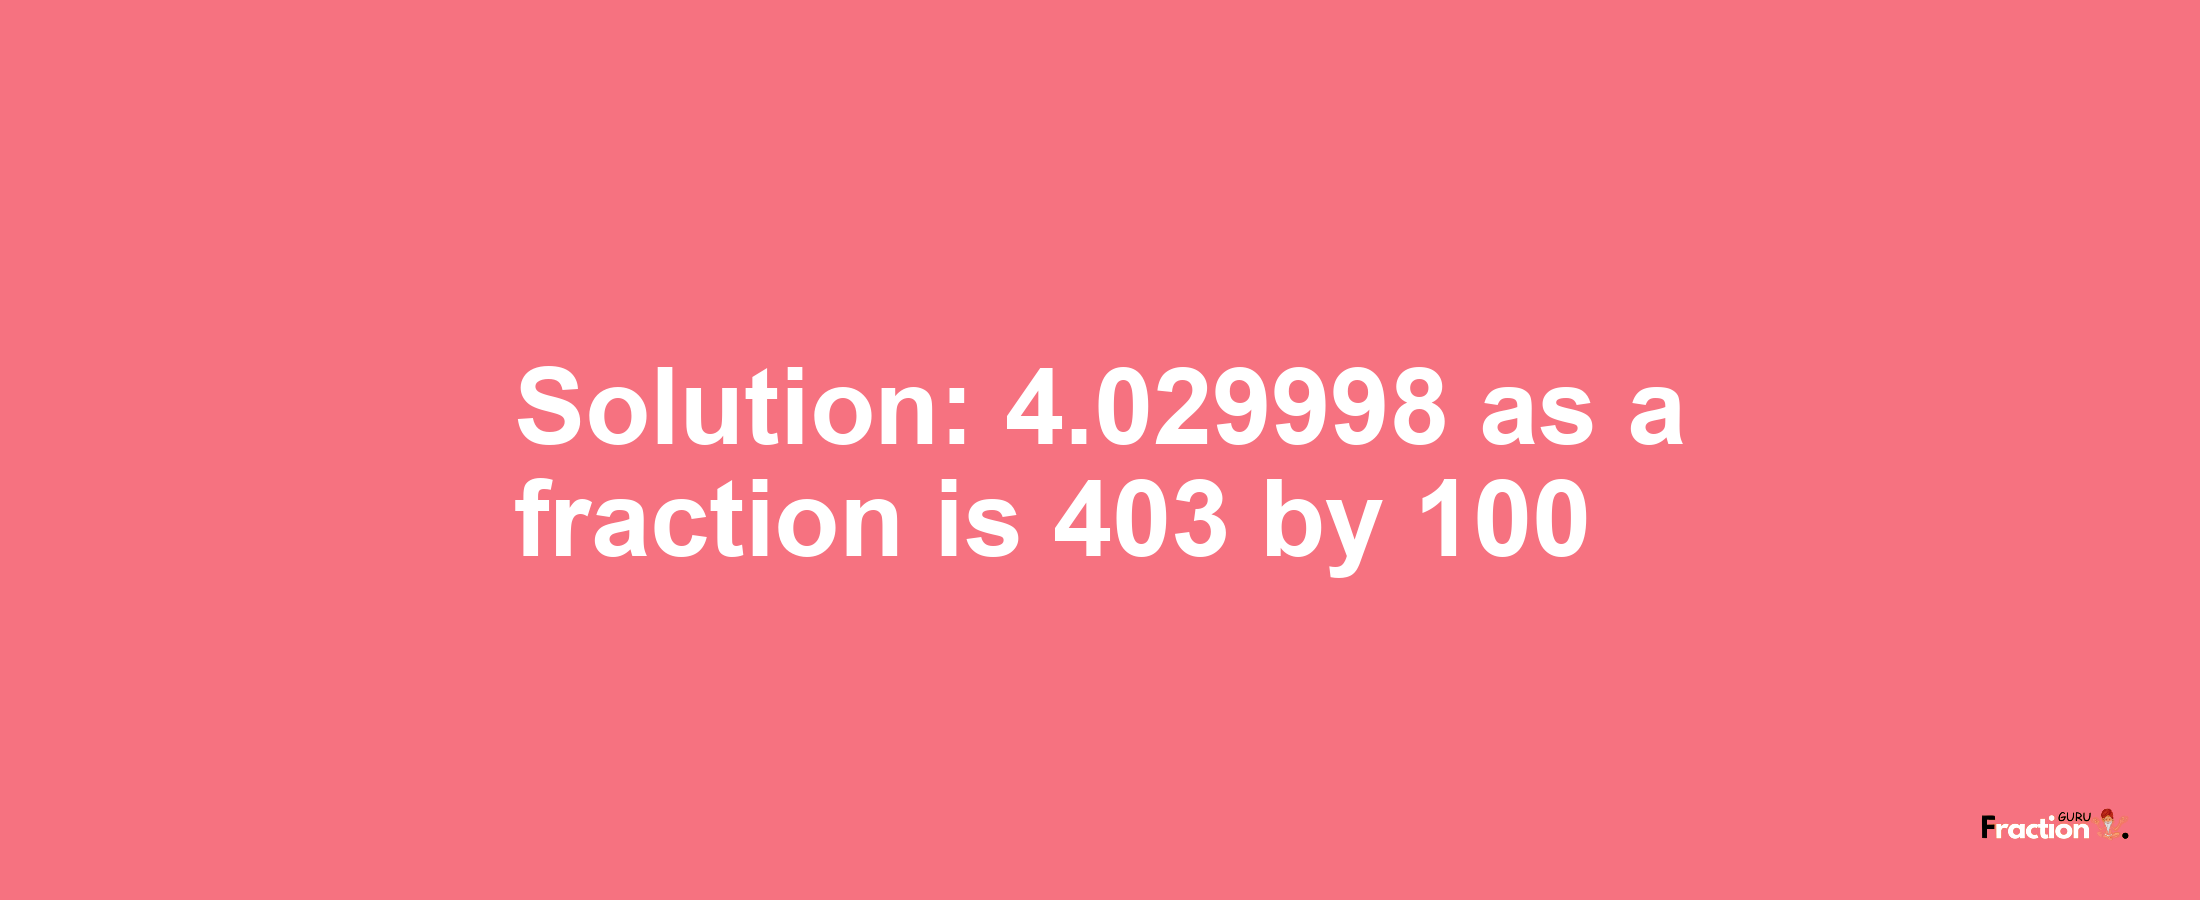 Solution:4.029998 as a fraction is 403/100